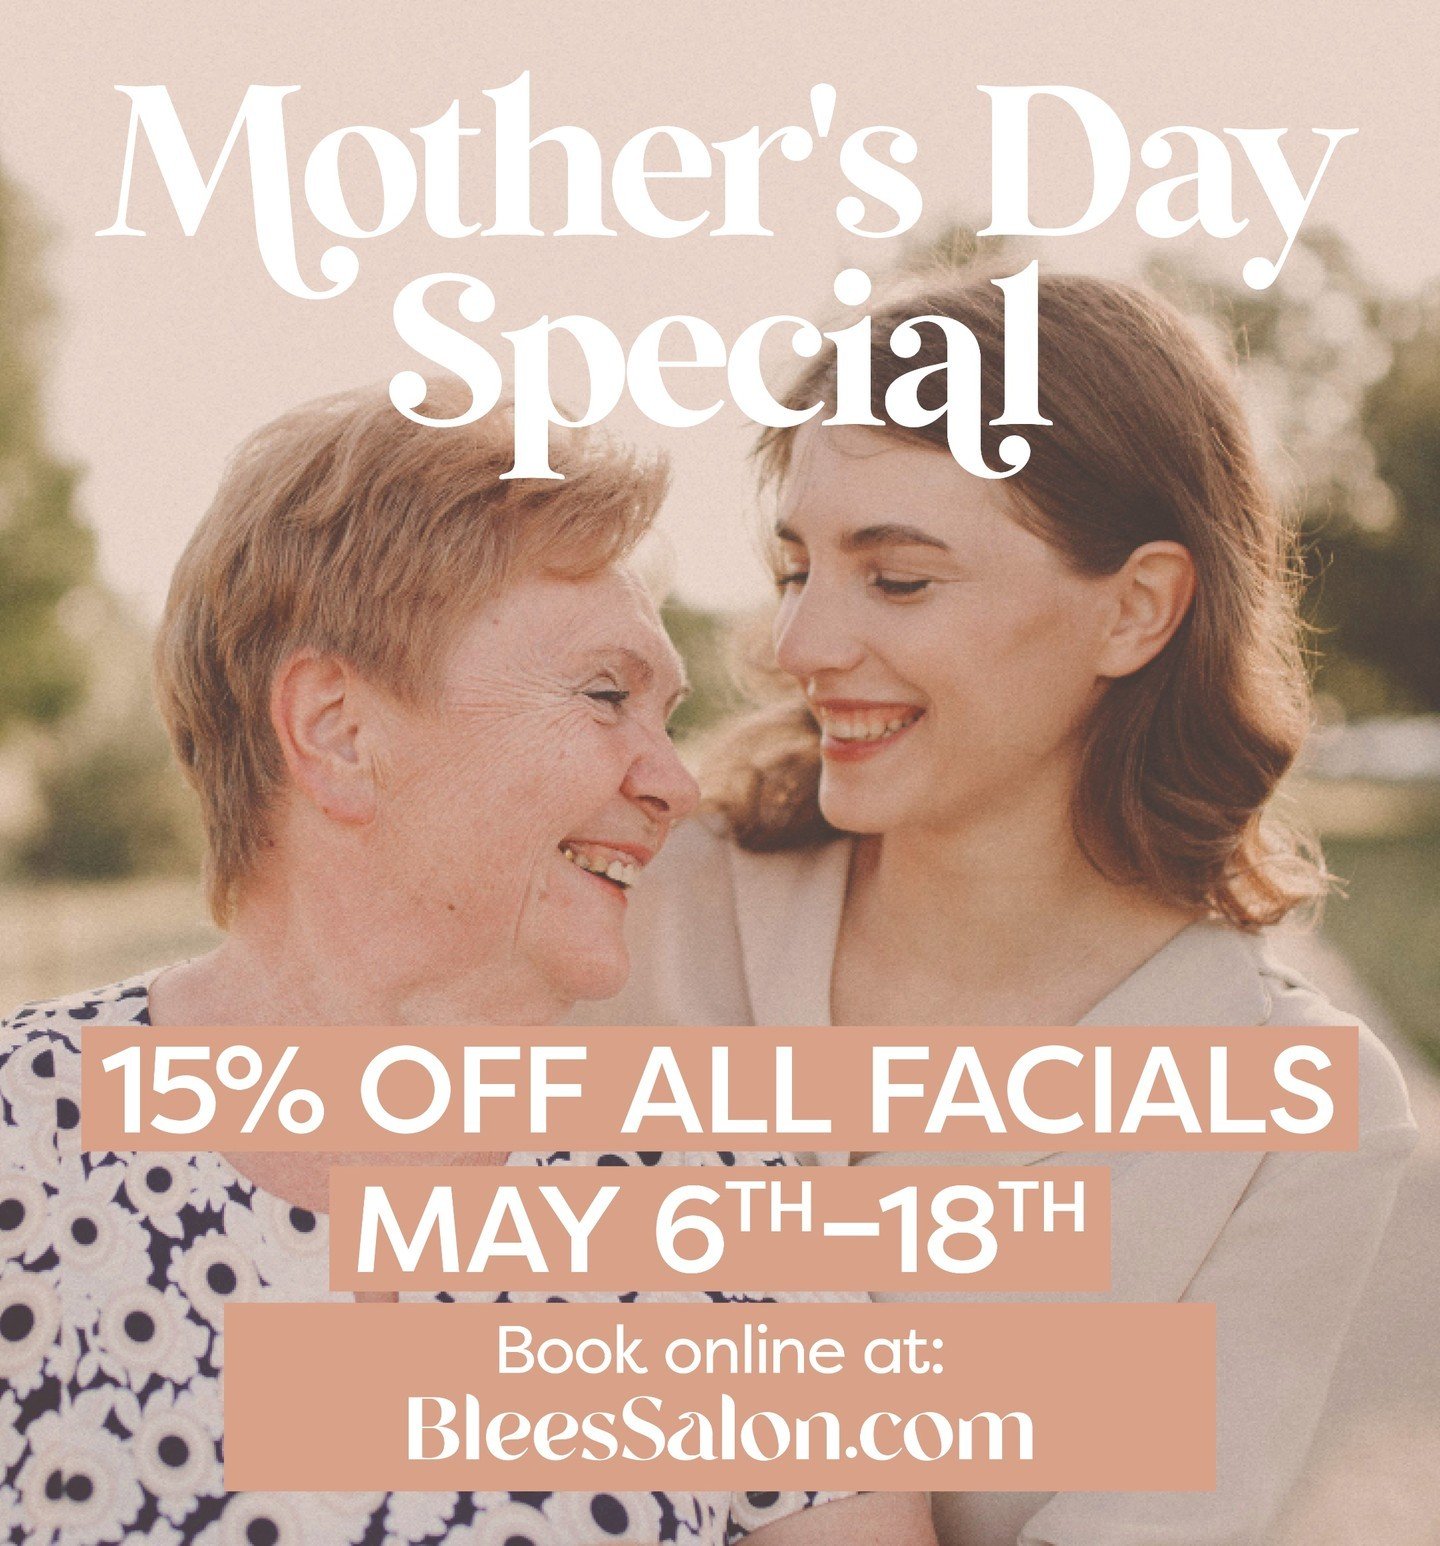 Mother's Day is this Sunday, the 12th! Save on facials booked until the 18th. You can also order a gift card online at BleesSalon.com or call us to pick one up! (518) 585-2557 #esthetician #skincareprofessional #licensedesthetician #skincare #mothers